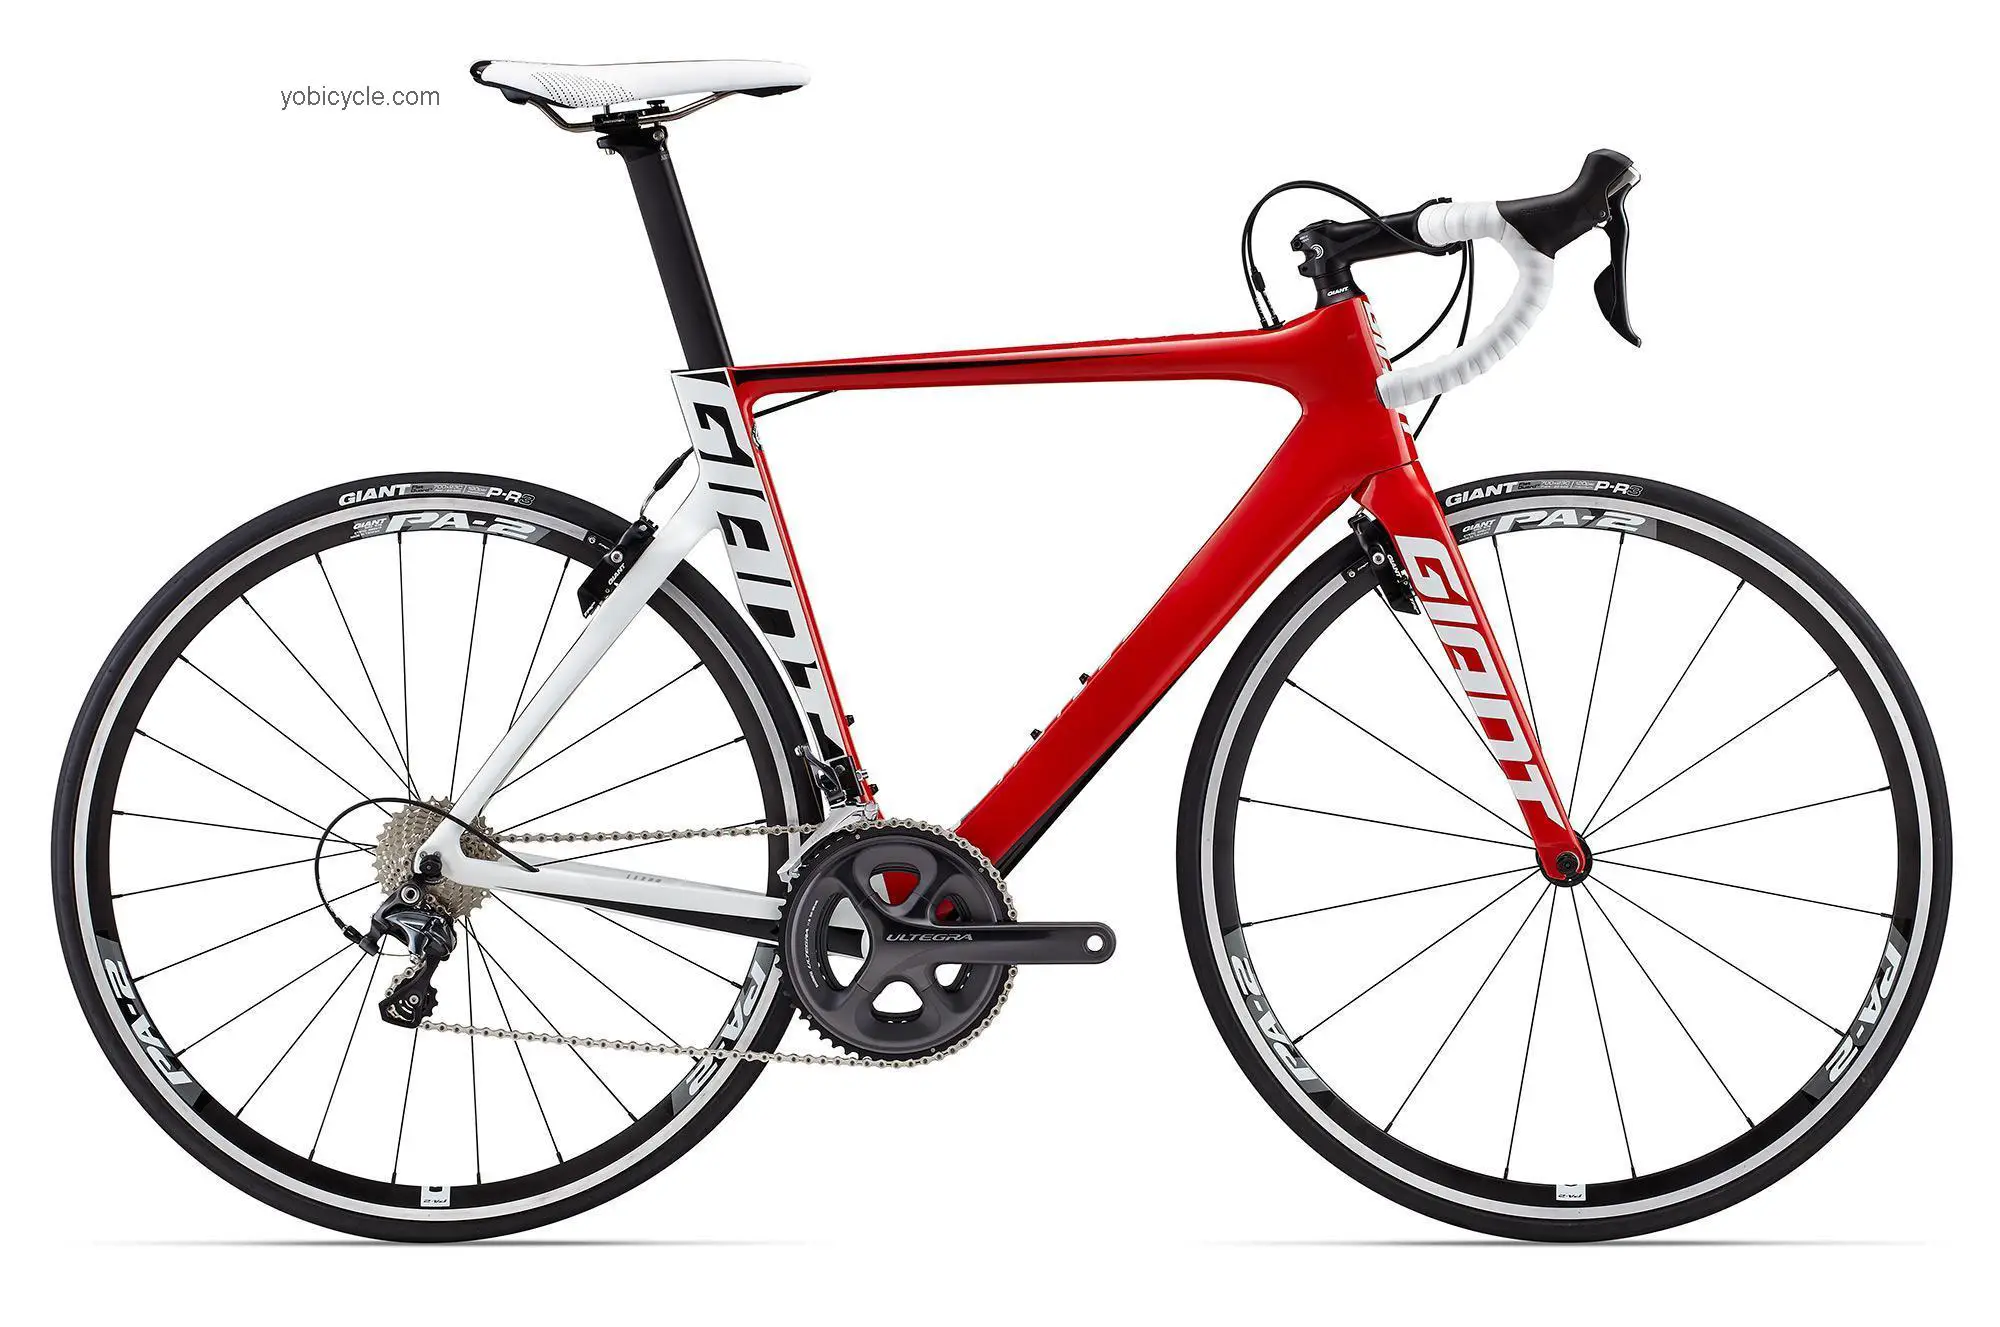 Giant Propel Advanced 1 2015 comparison online with competitors